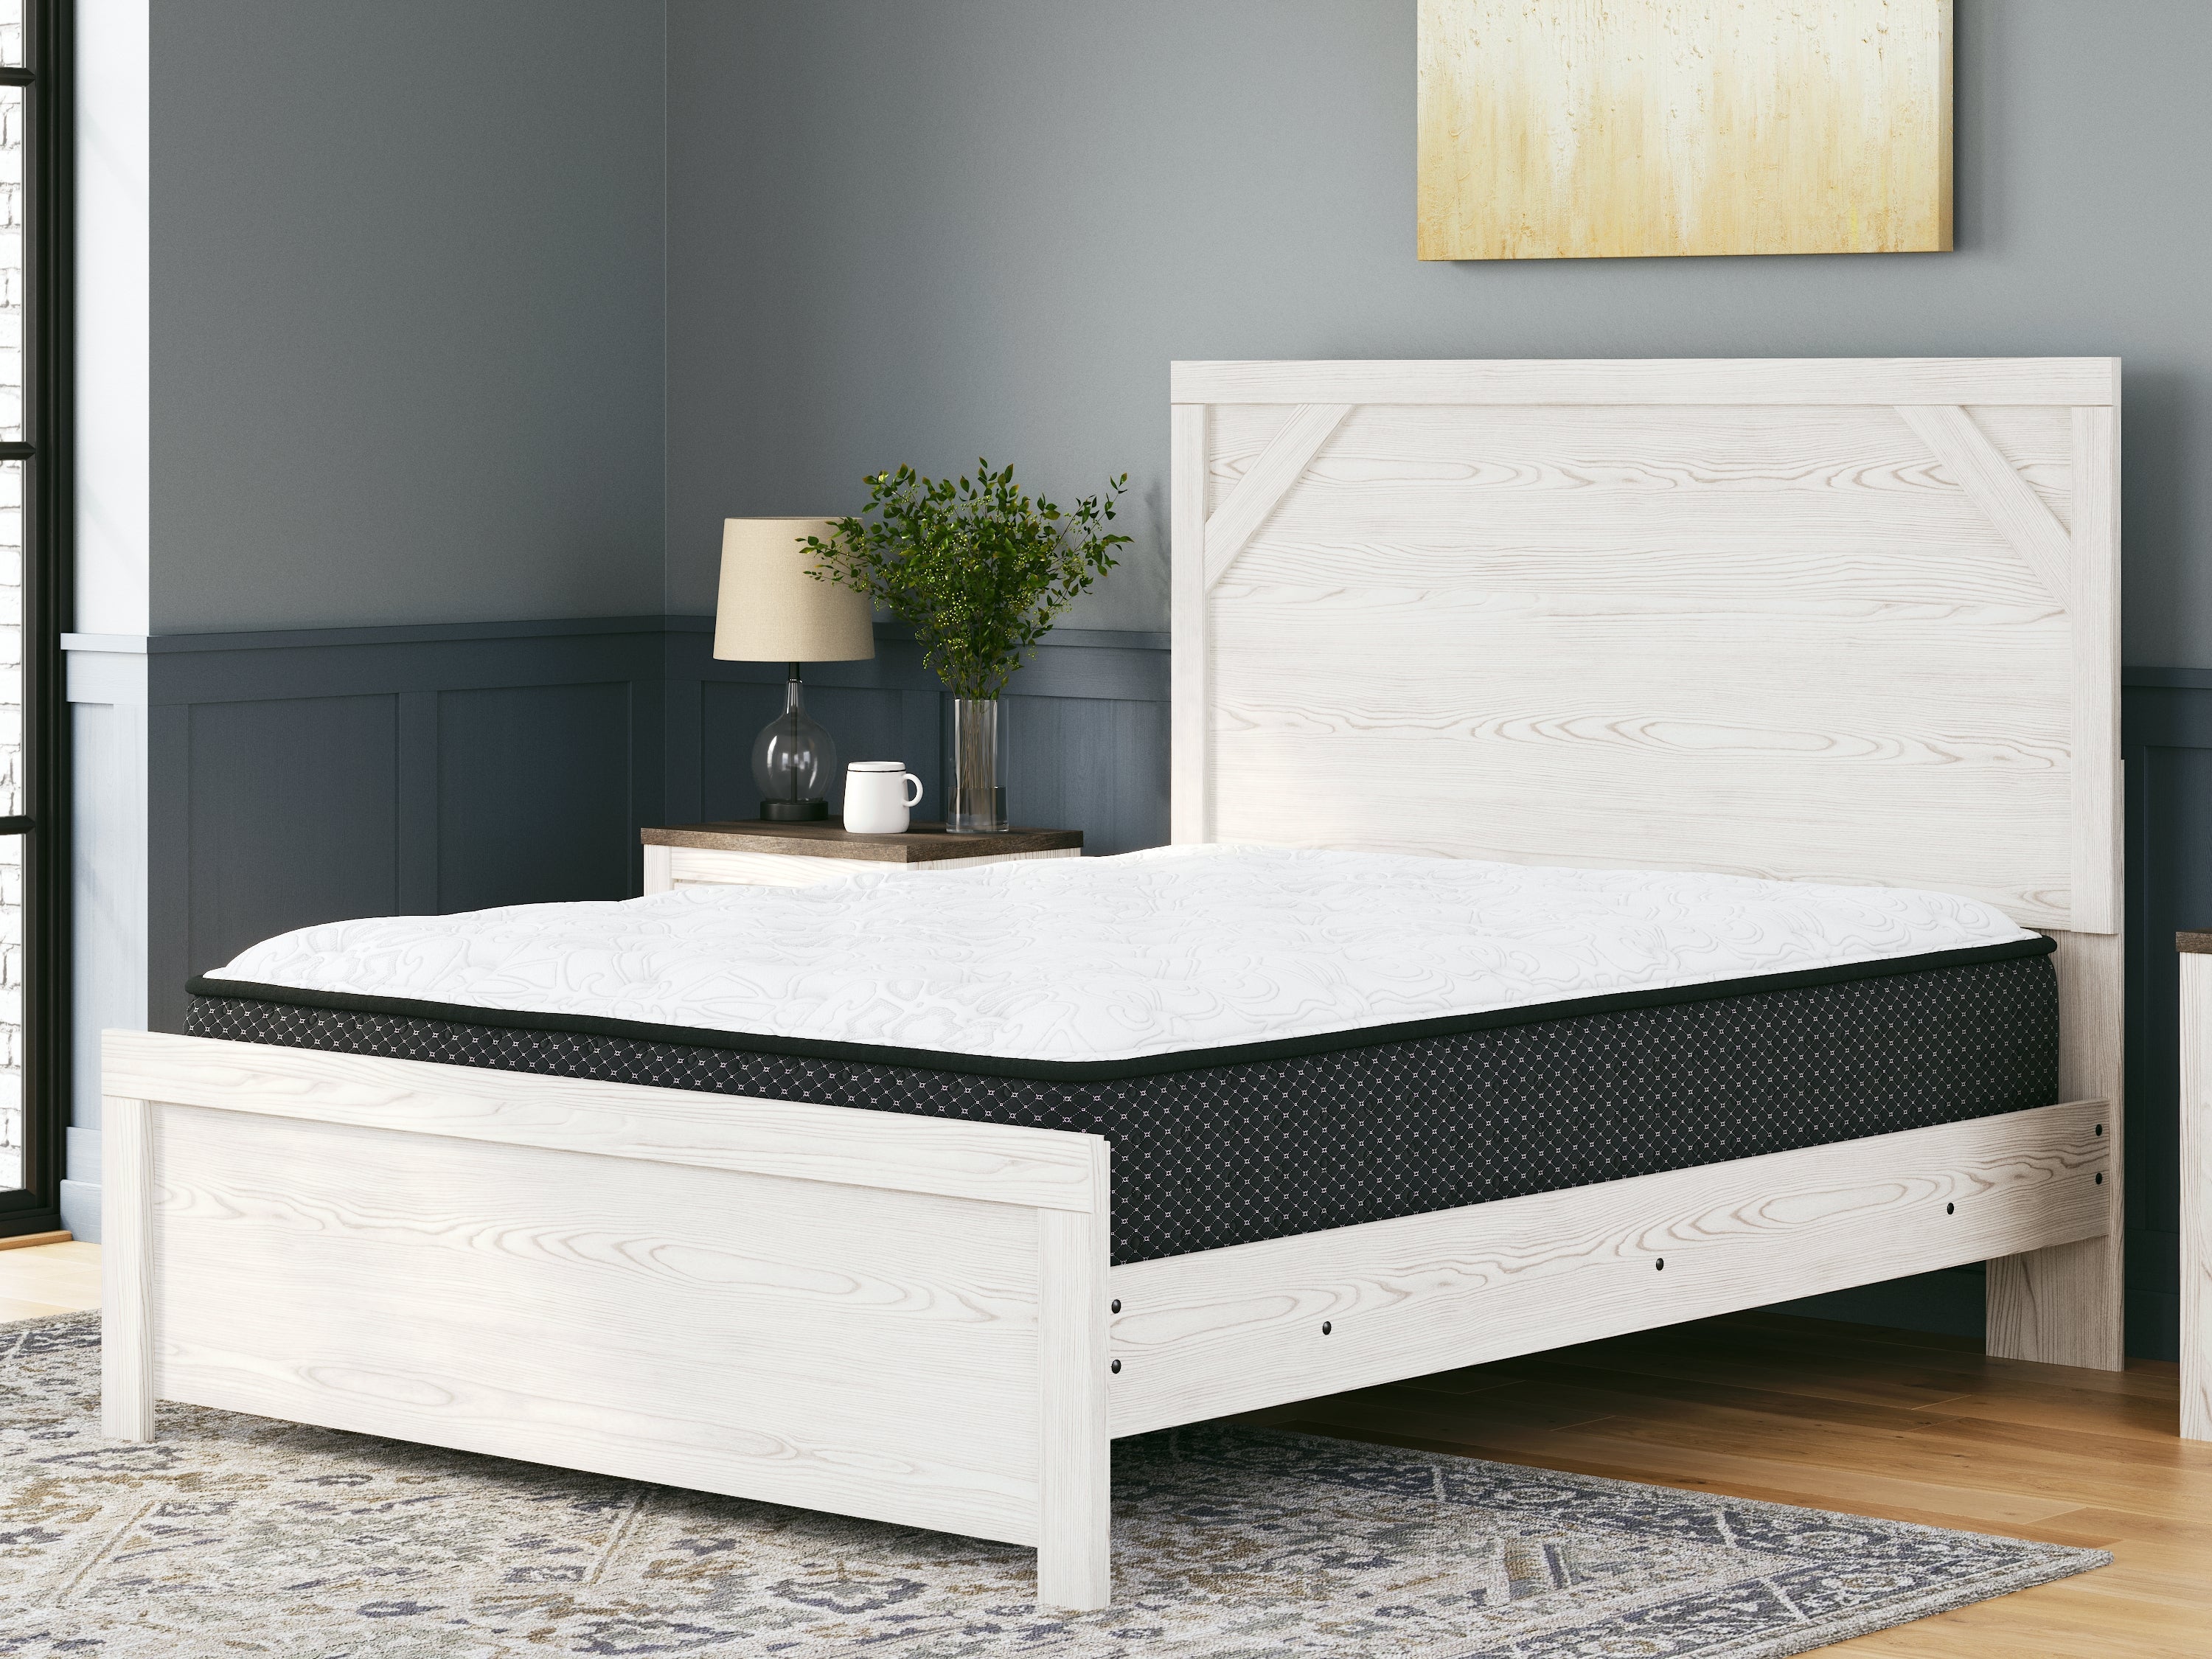 Anniversary Edition Plush Queen Mattress with Head-Foot Model Best Queen Adjustable Base - furniture place usa